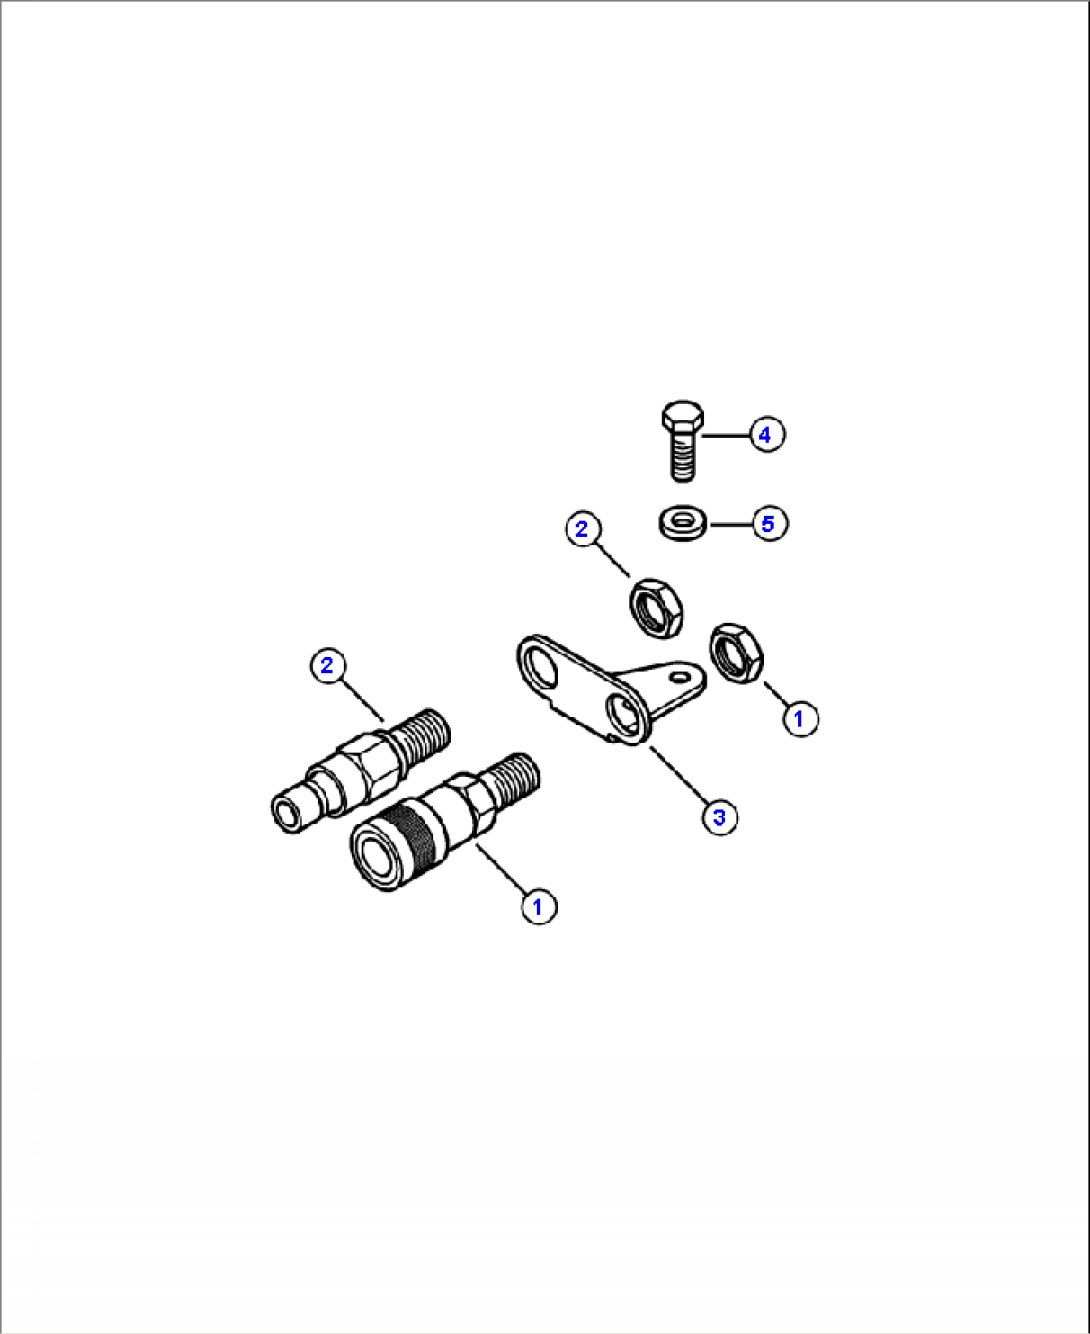 H3005-01A16 FITTING LOCATION QUICK DISCONNECTS - STANDARD FLOW